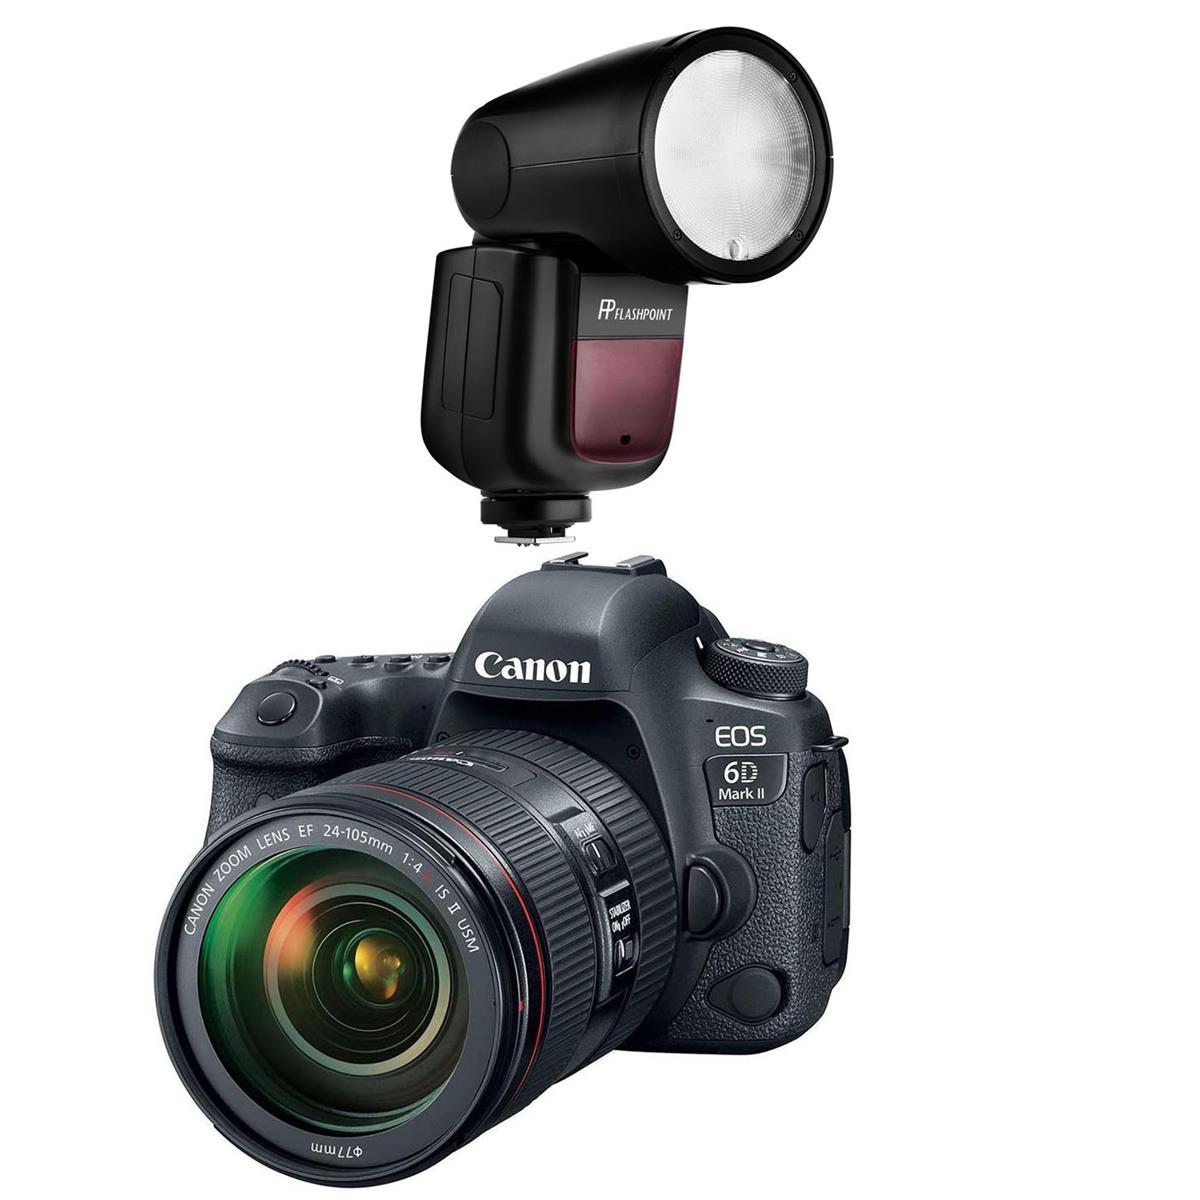 Image of Canon EOS 6D Mark II DSLR with EF 24-105mm f/4L IS II USM Lens With LI-ON Flash